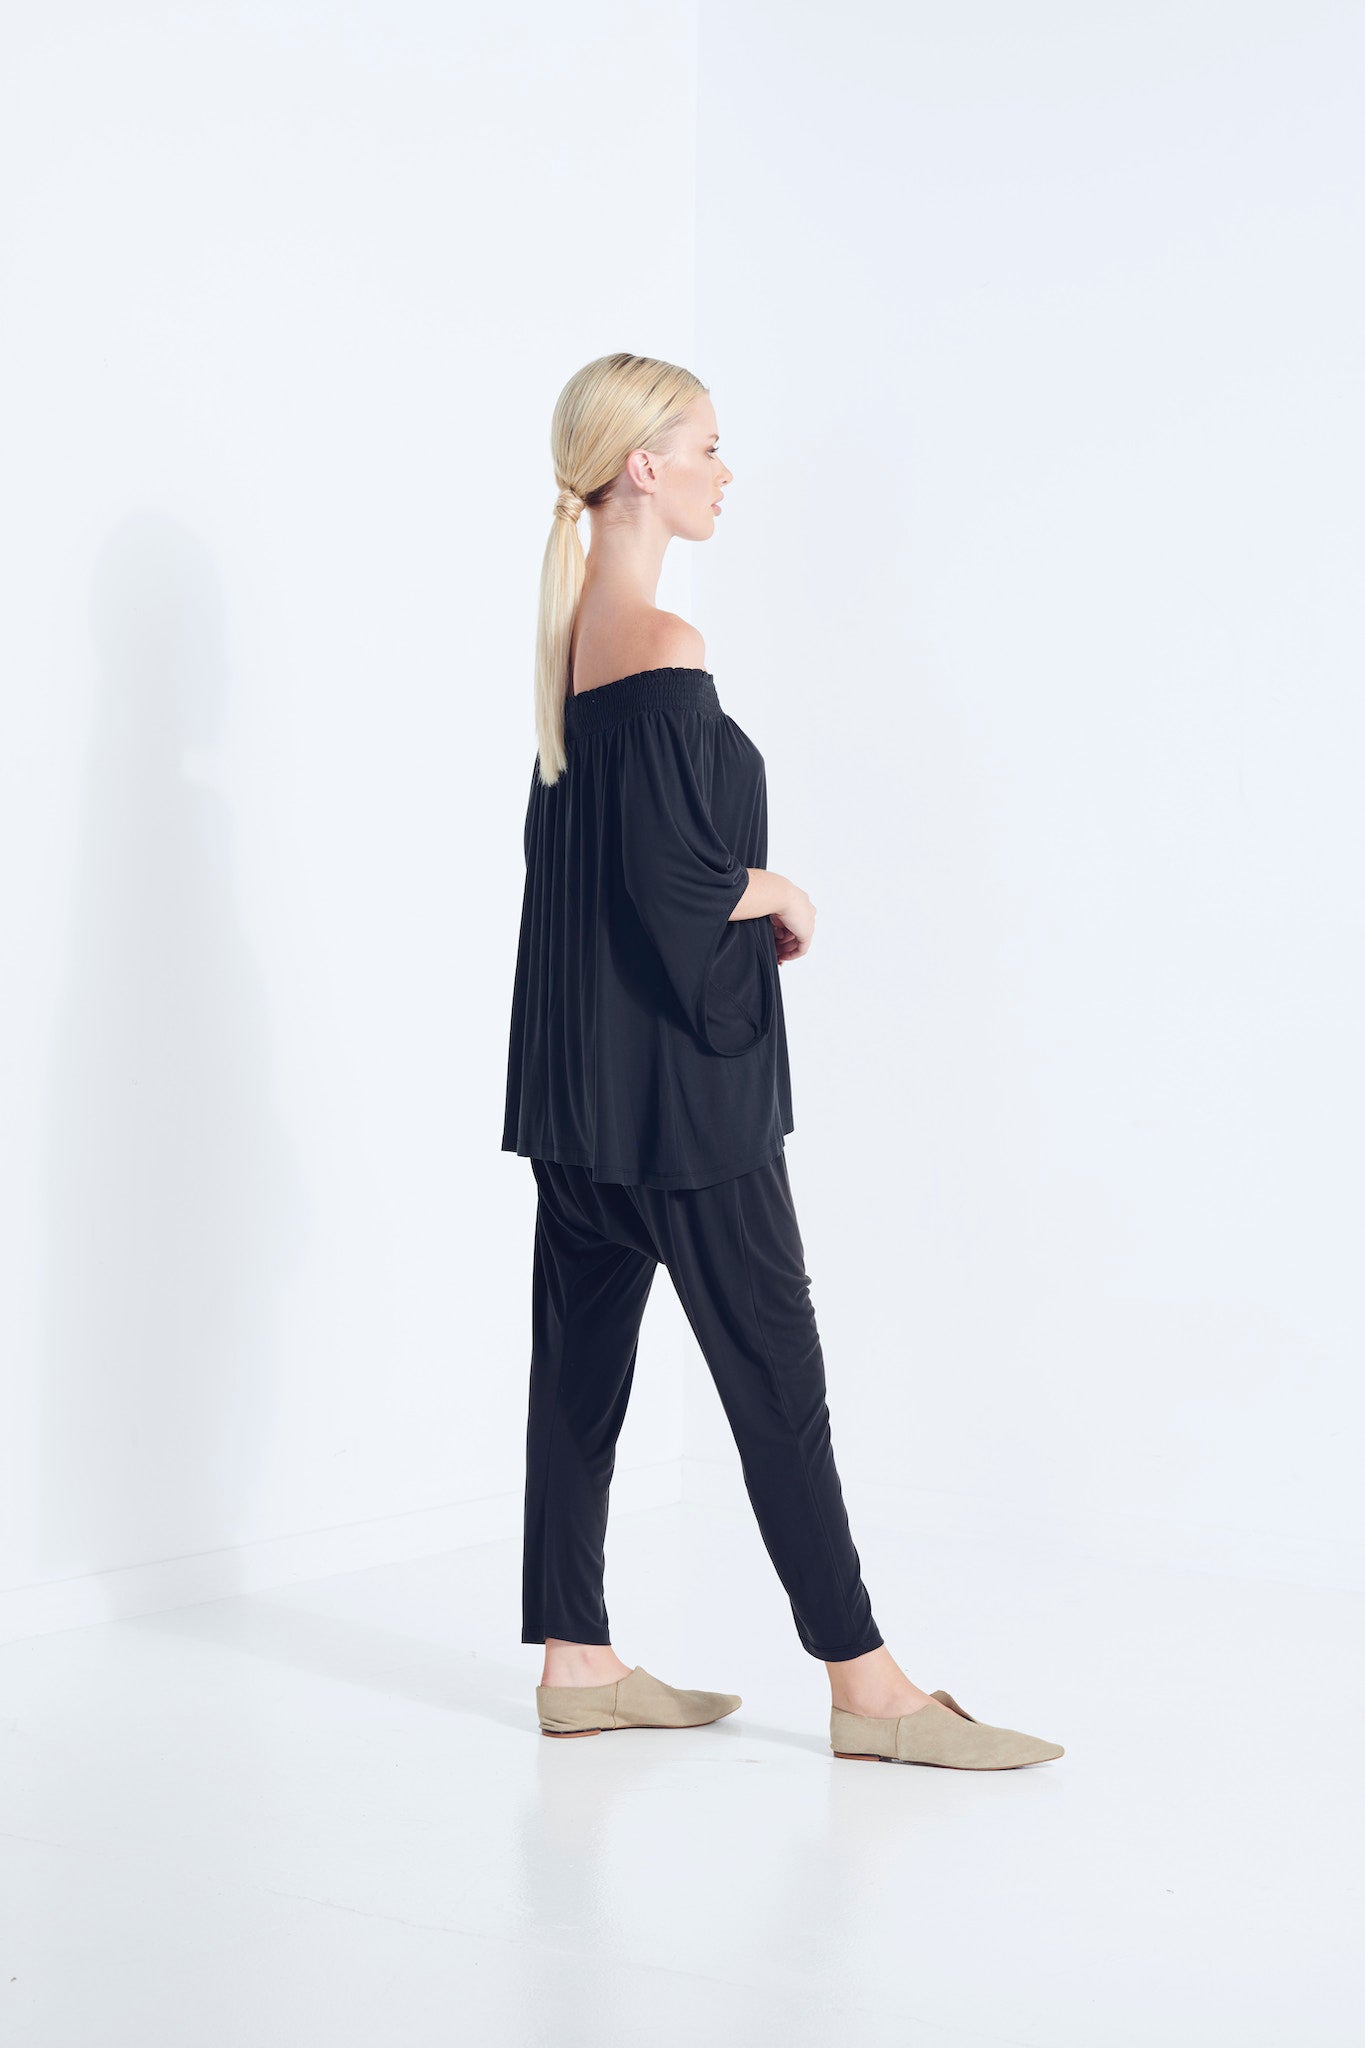 NAEVIA OFF SHOULDER TOP KNIT BEECHWOOD MODAL ELASTIC TOP WITH BELL SLEEVE DARK WASHED BLACK SIDE VIEW